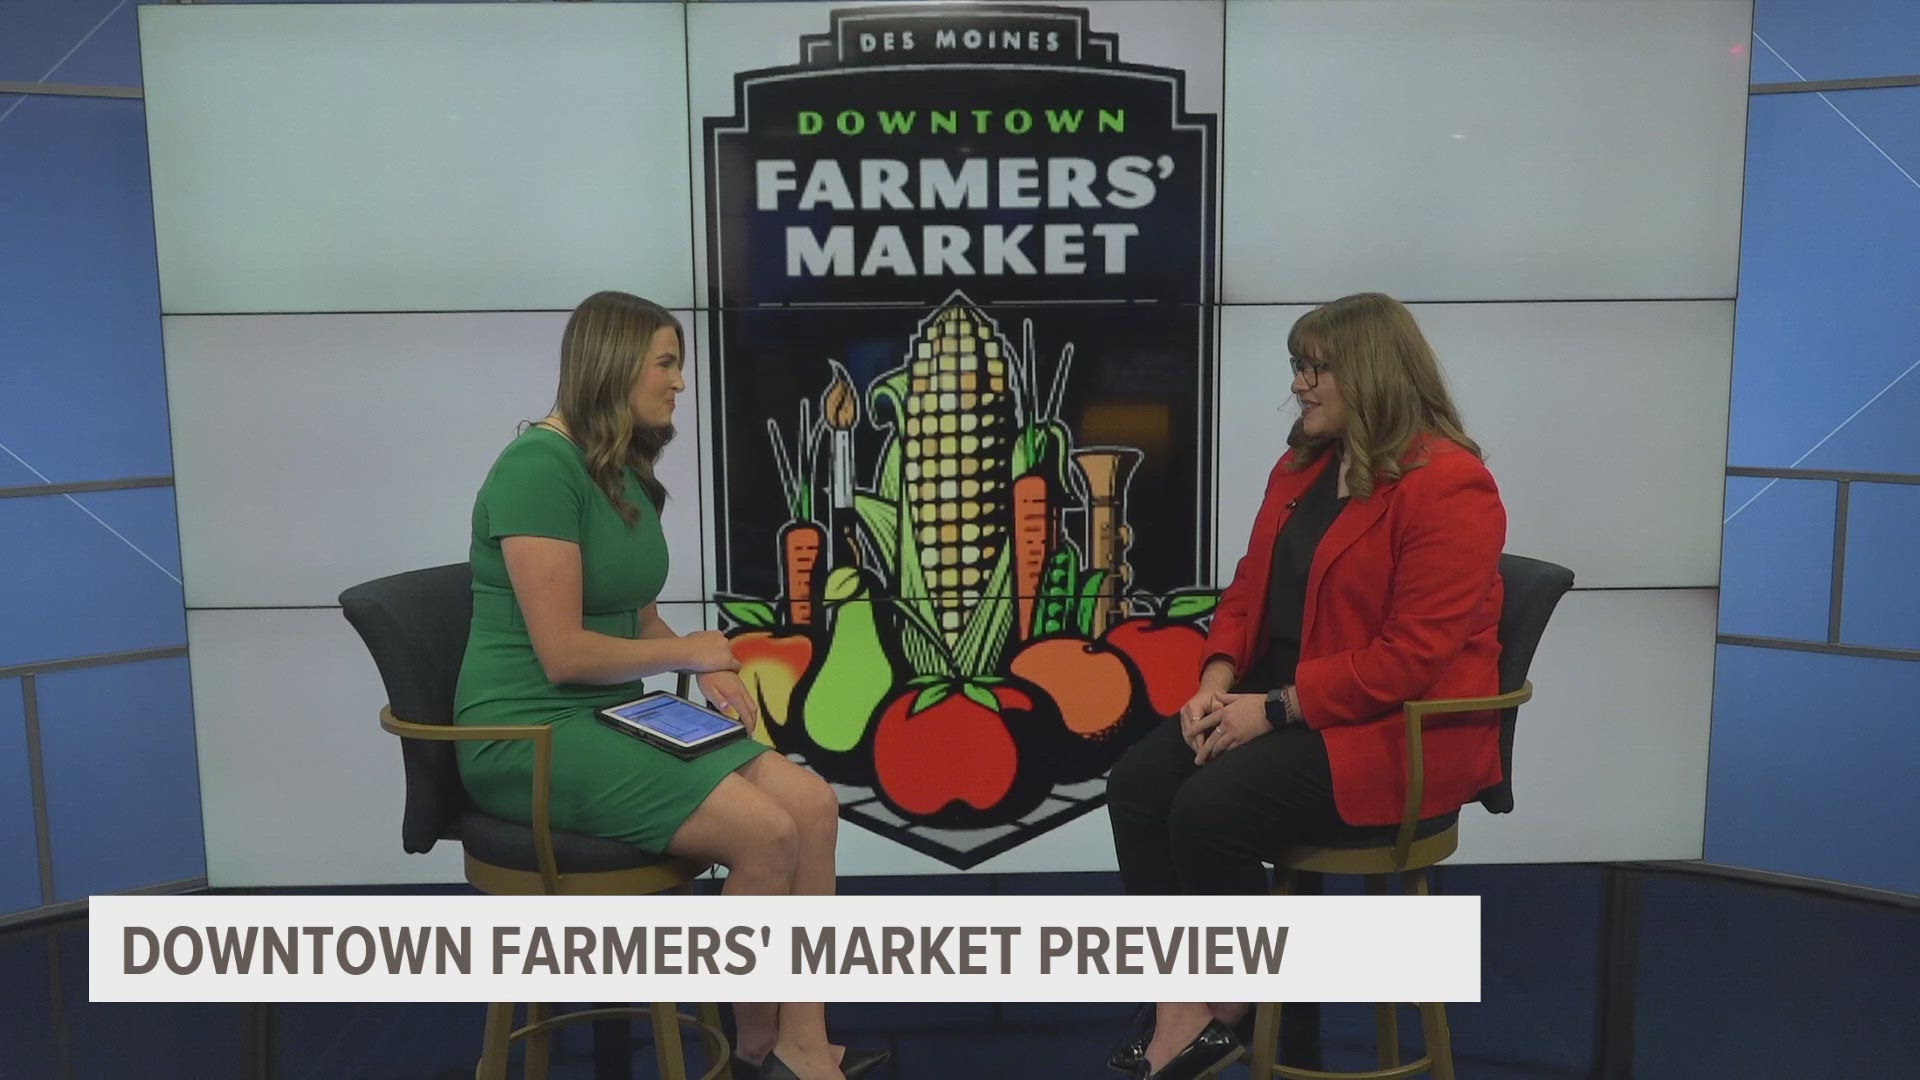 The Des Moines Downtown Farmers' Market will take place every Saturday morning, beginning on May 4 and running through Oct. 26.